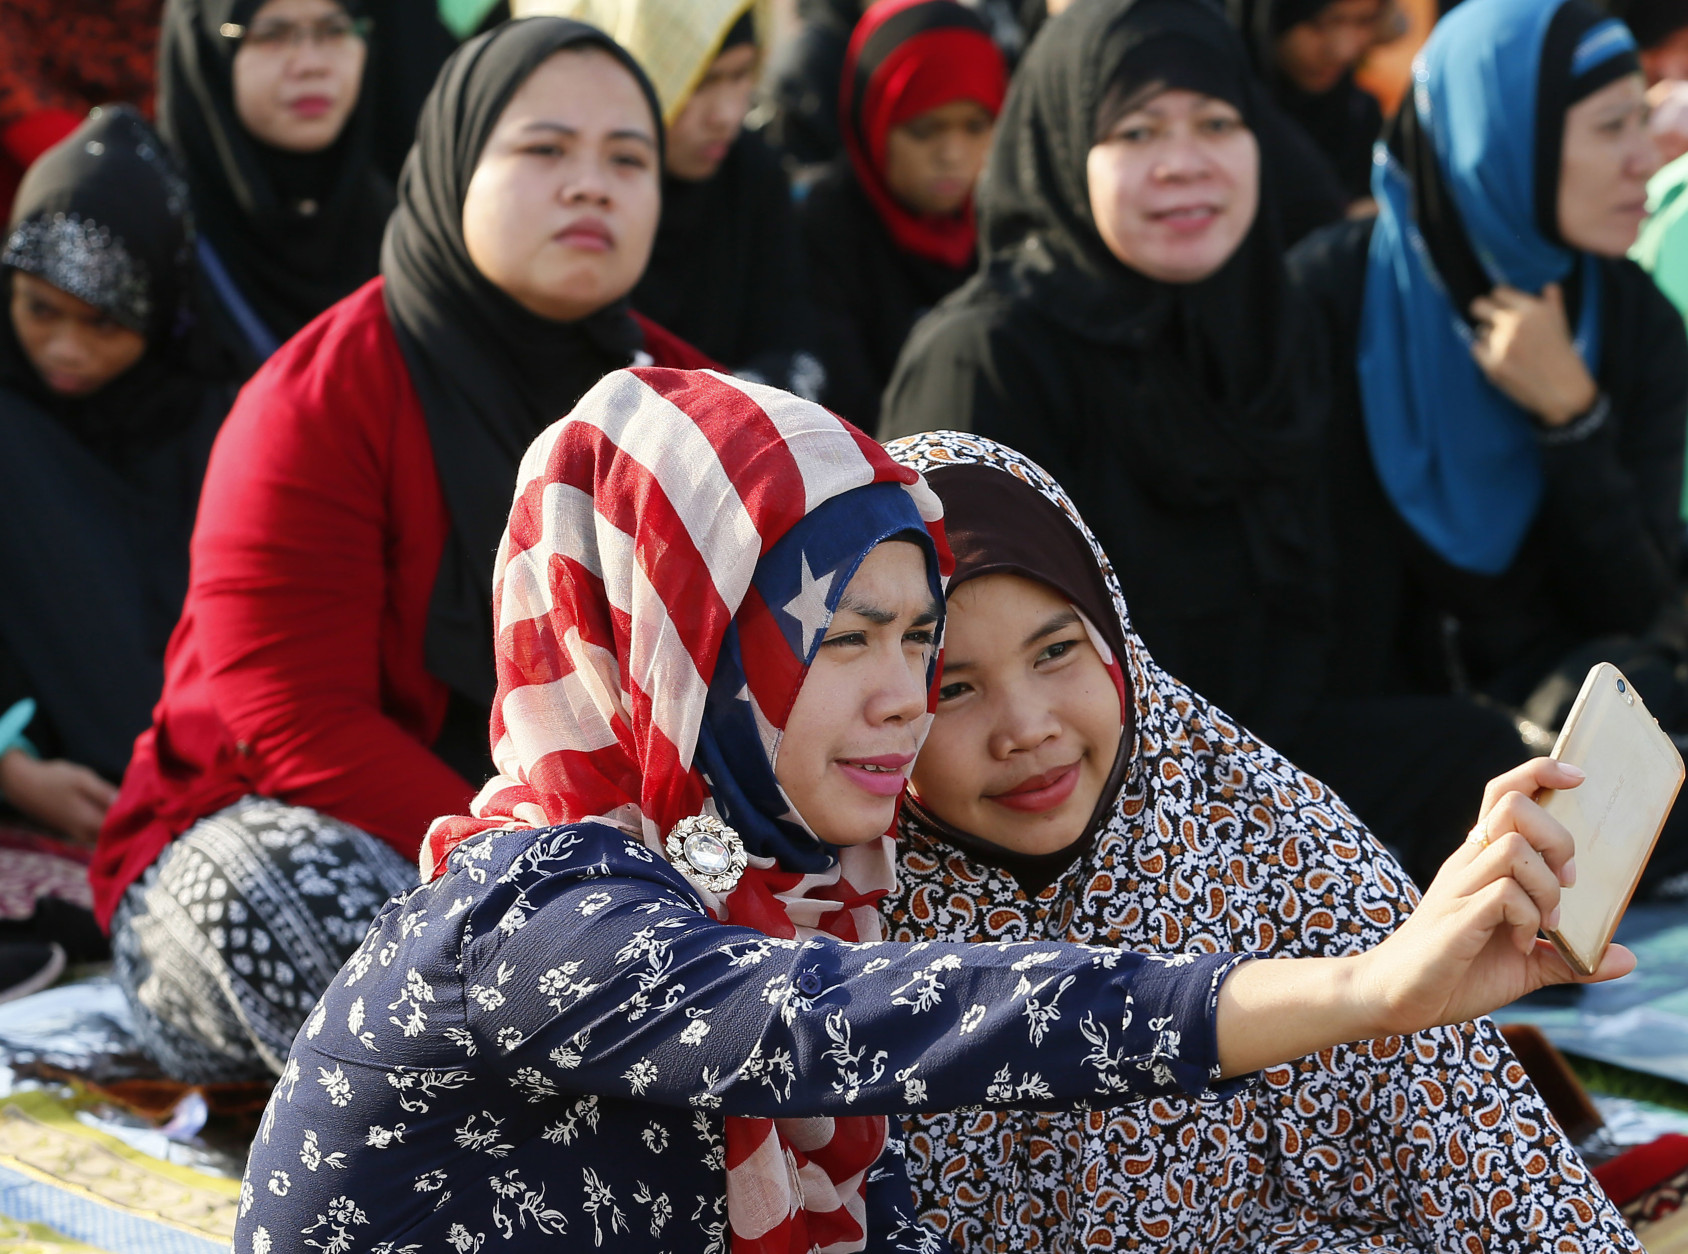 Muslims take their selfie photograph as they gather for prayer to mark the end of the holy month of Ramadan known as Eid al Fitr, Wednesday, July 6, 2016 in Manila, Philippines. The Eid, one of the most important holidays in the Muslim world, is celebrated with prayers, picnics and family reunions. (AP Photo/Bullit Marquez)